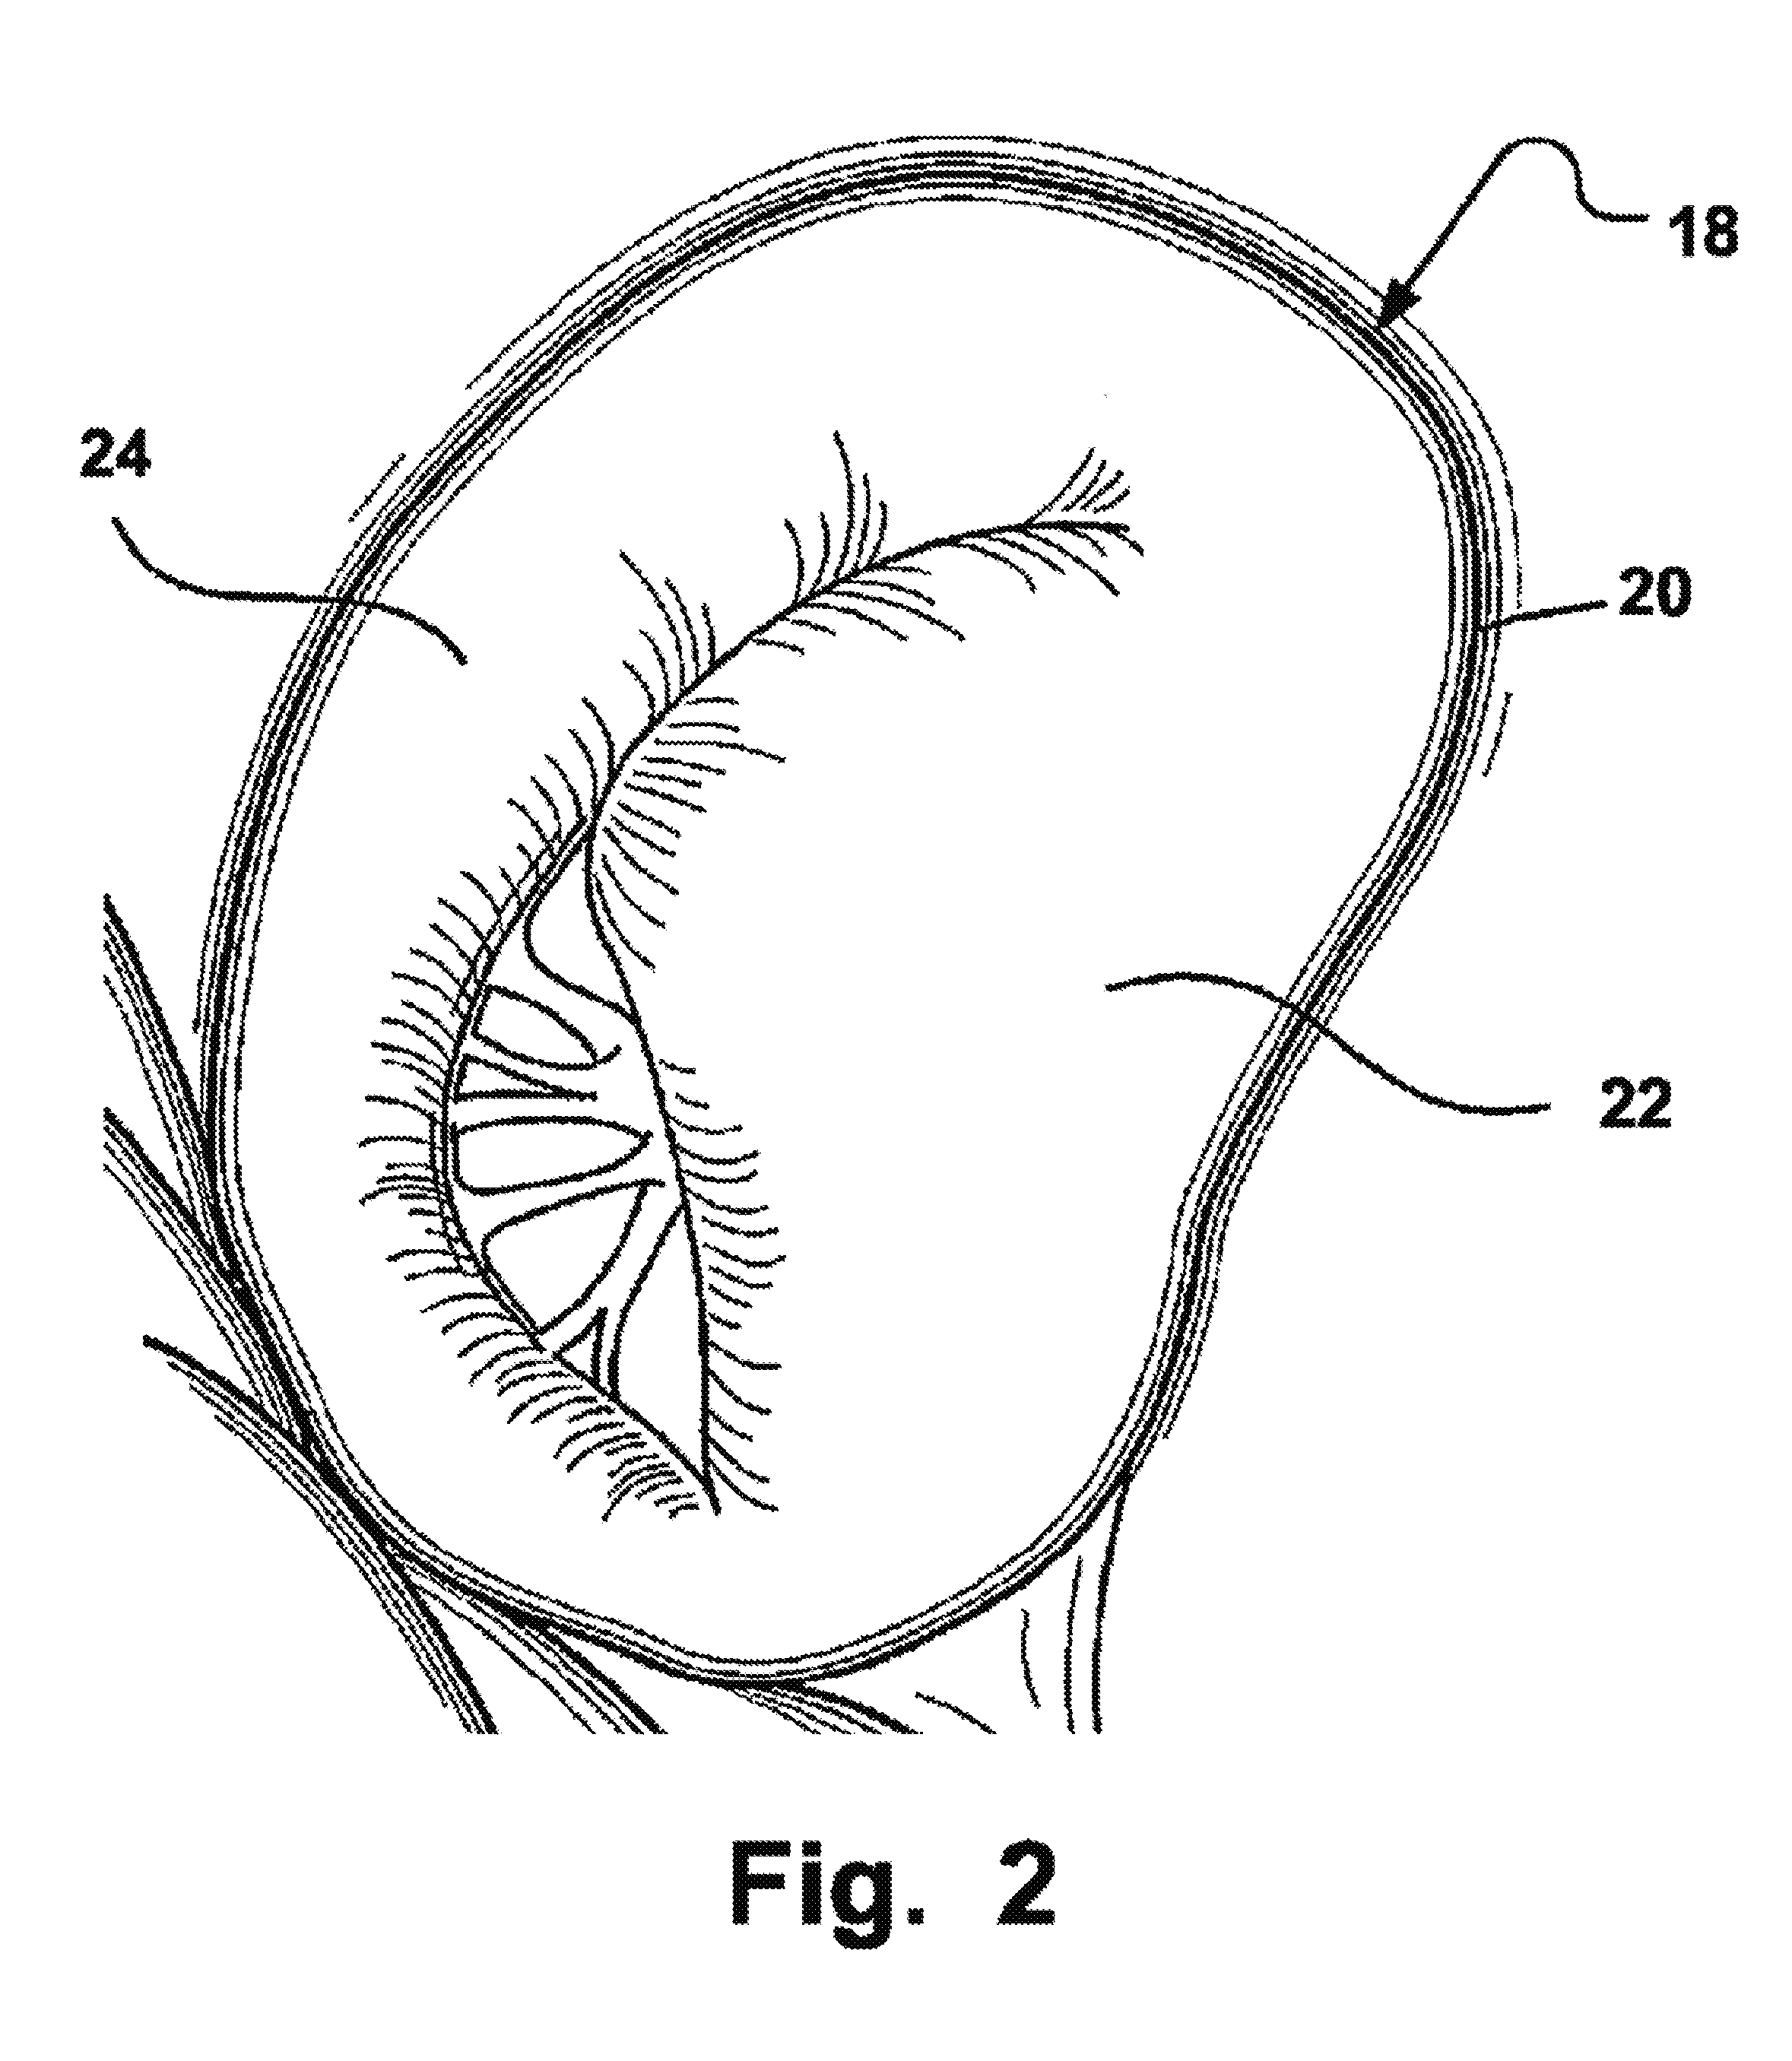 Arrangement, a loop-shaped support, a prosthetic heart valve and a method of repairing or replacing a native heart valve